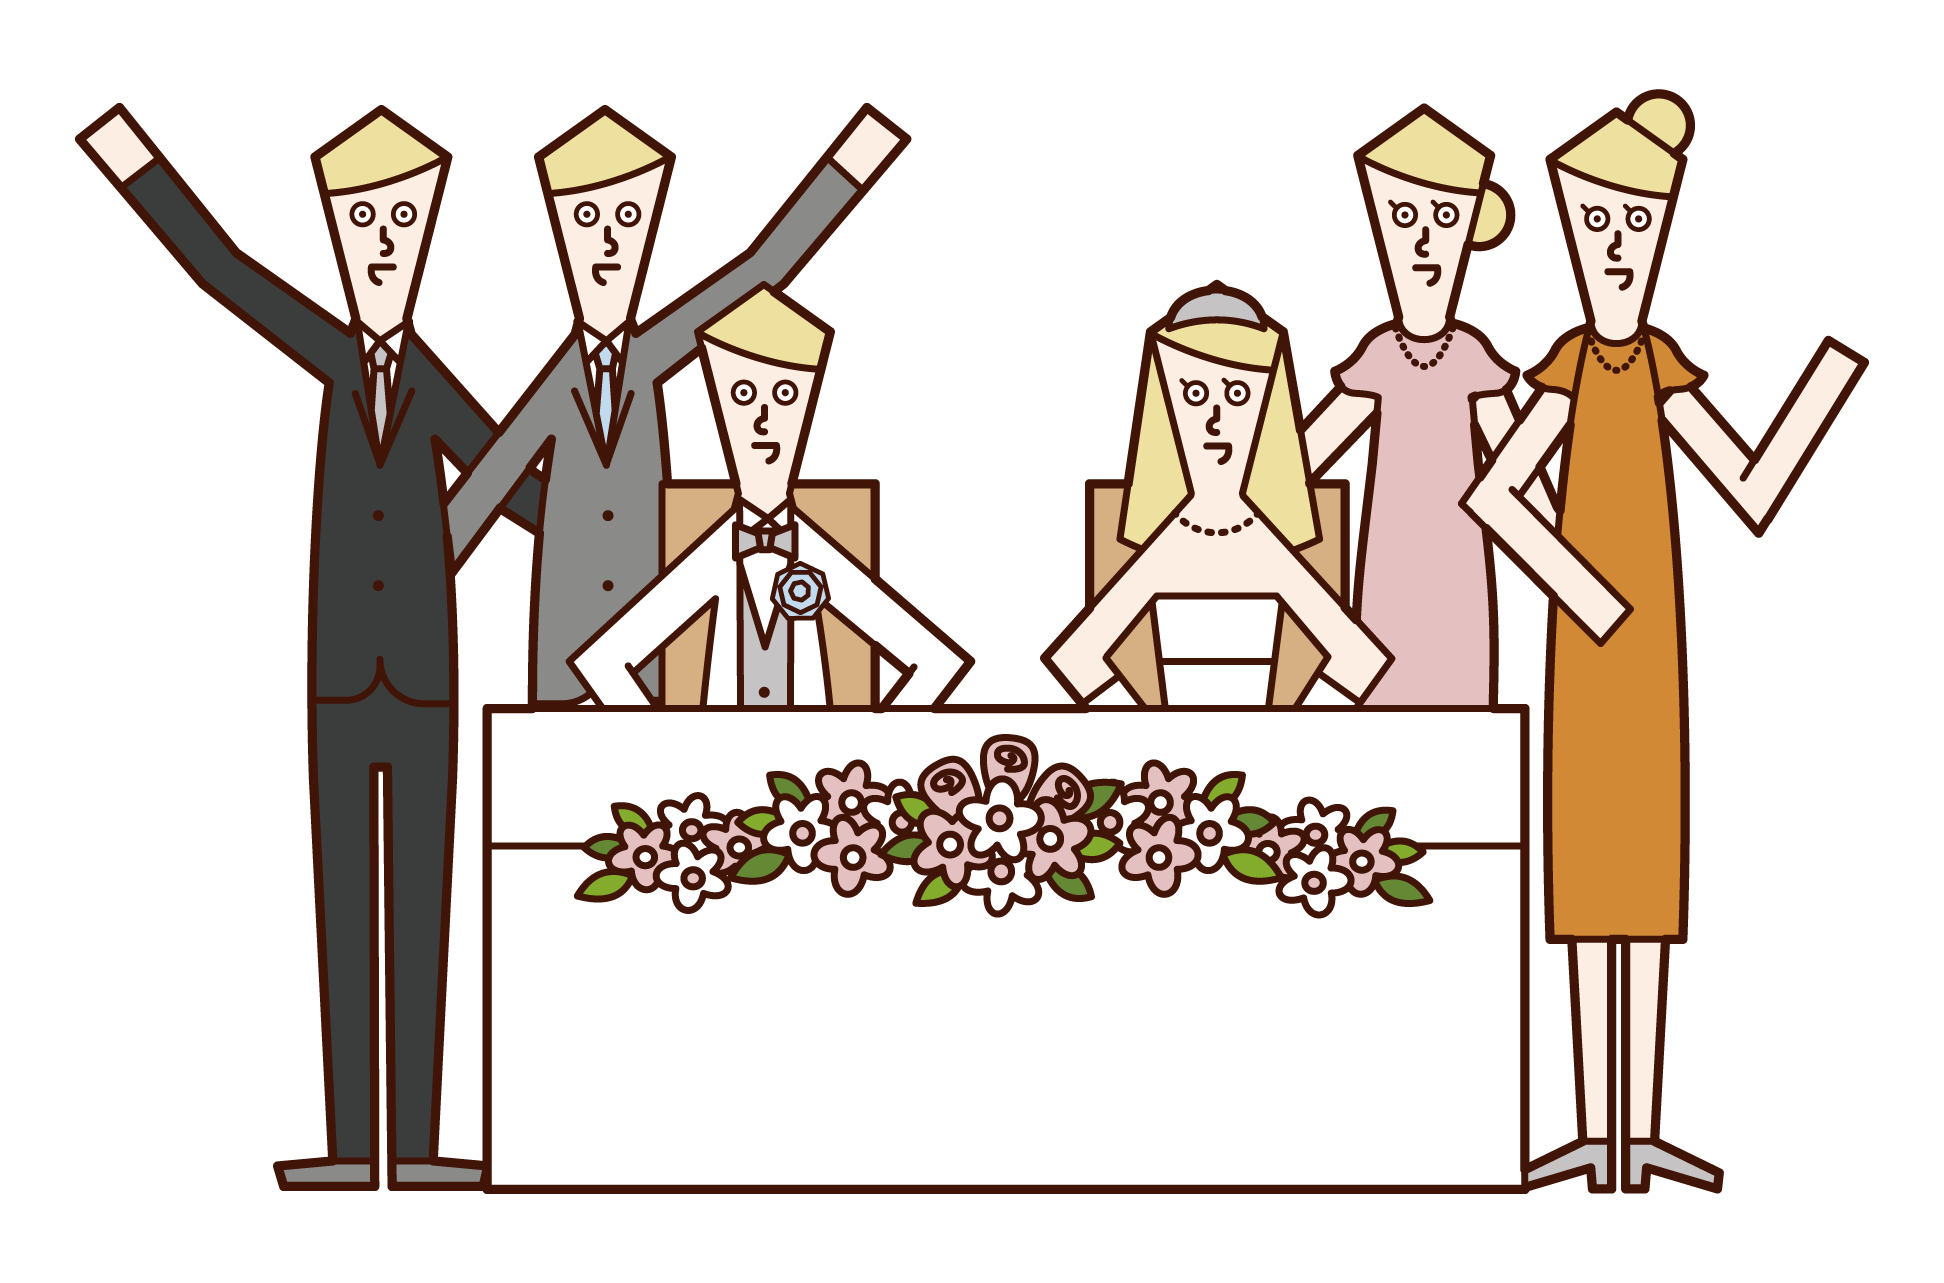 Illustration of friends taking pictures with bride and groom